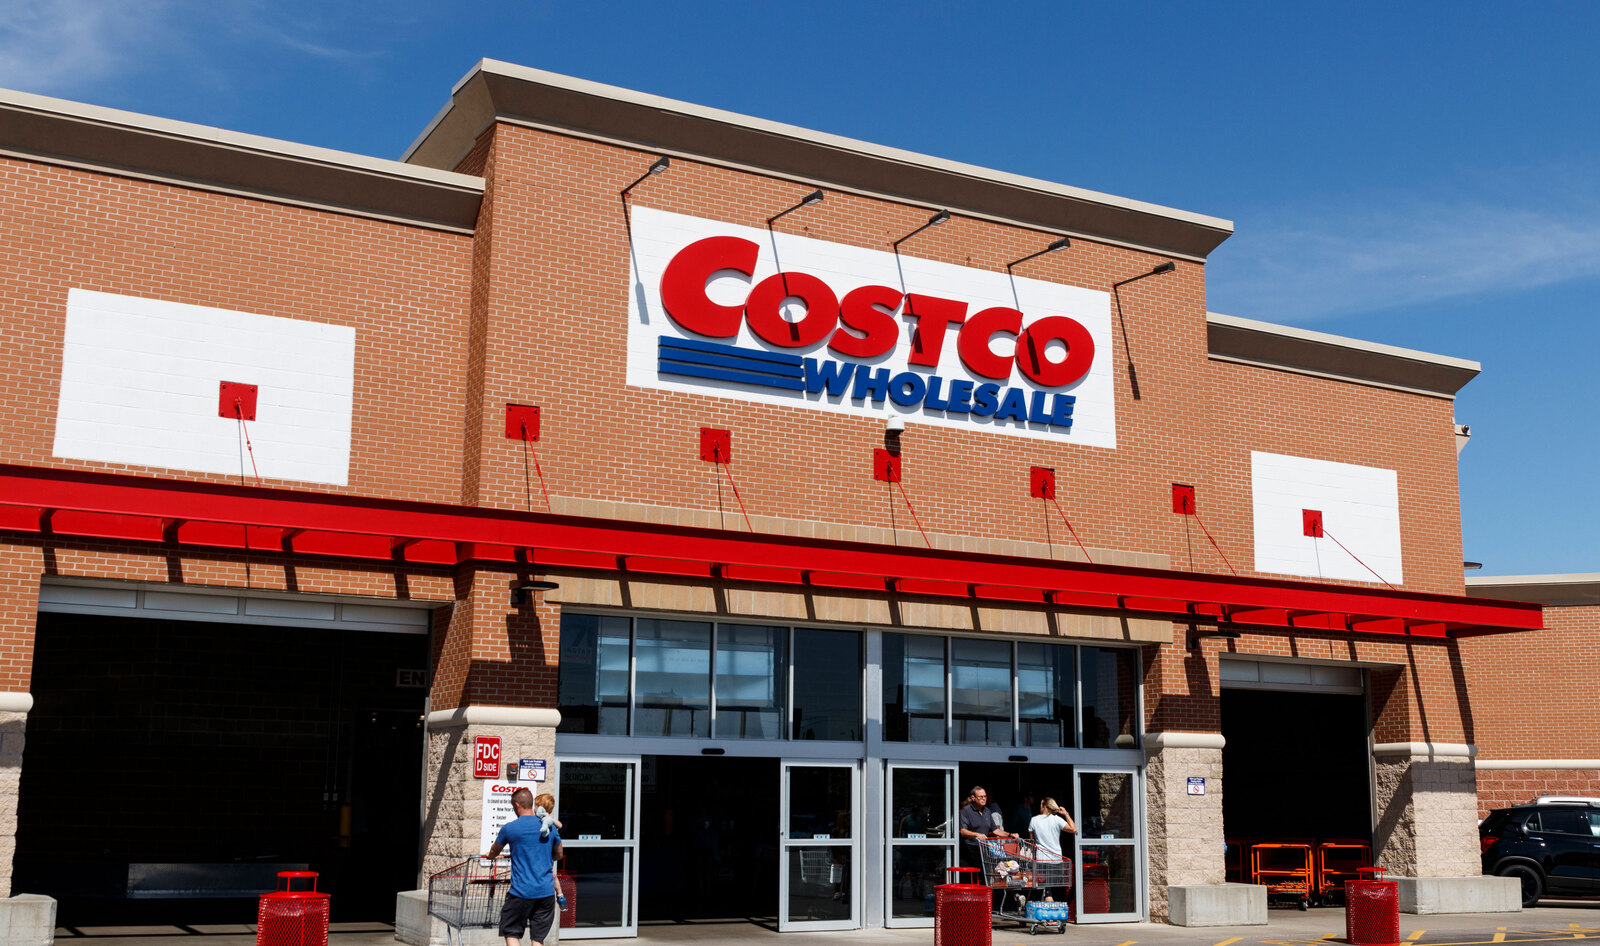 Costco’s Popular Rotisserie Chickens Are a Product of Animal Cruelty, New Investigation Finds